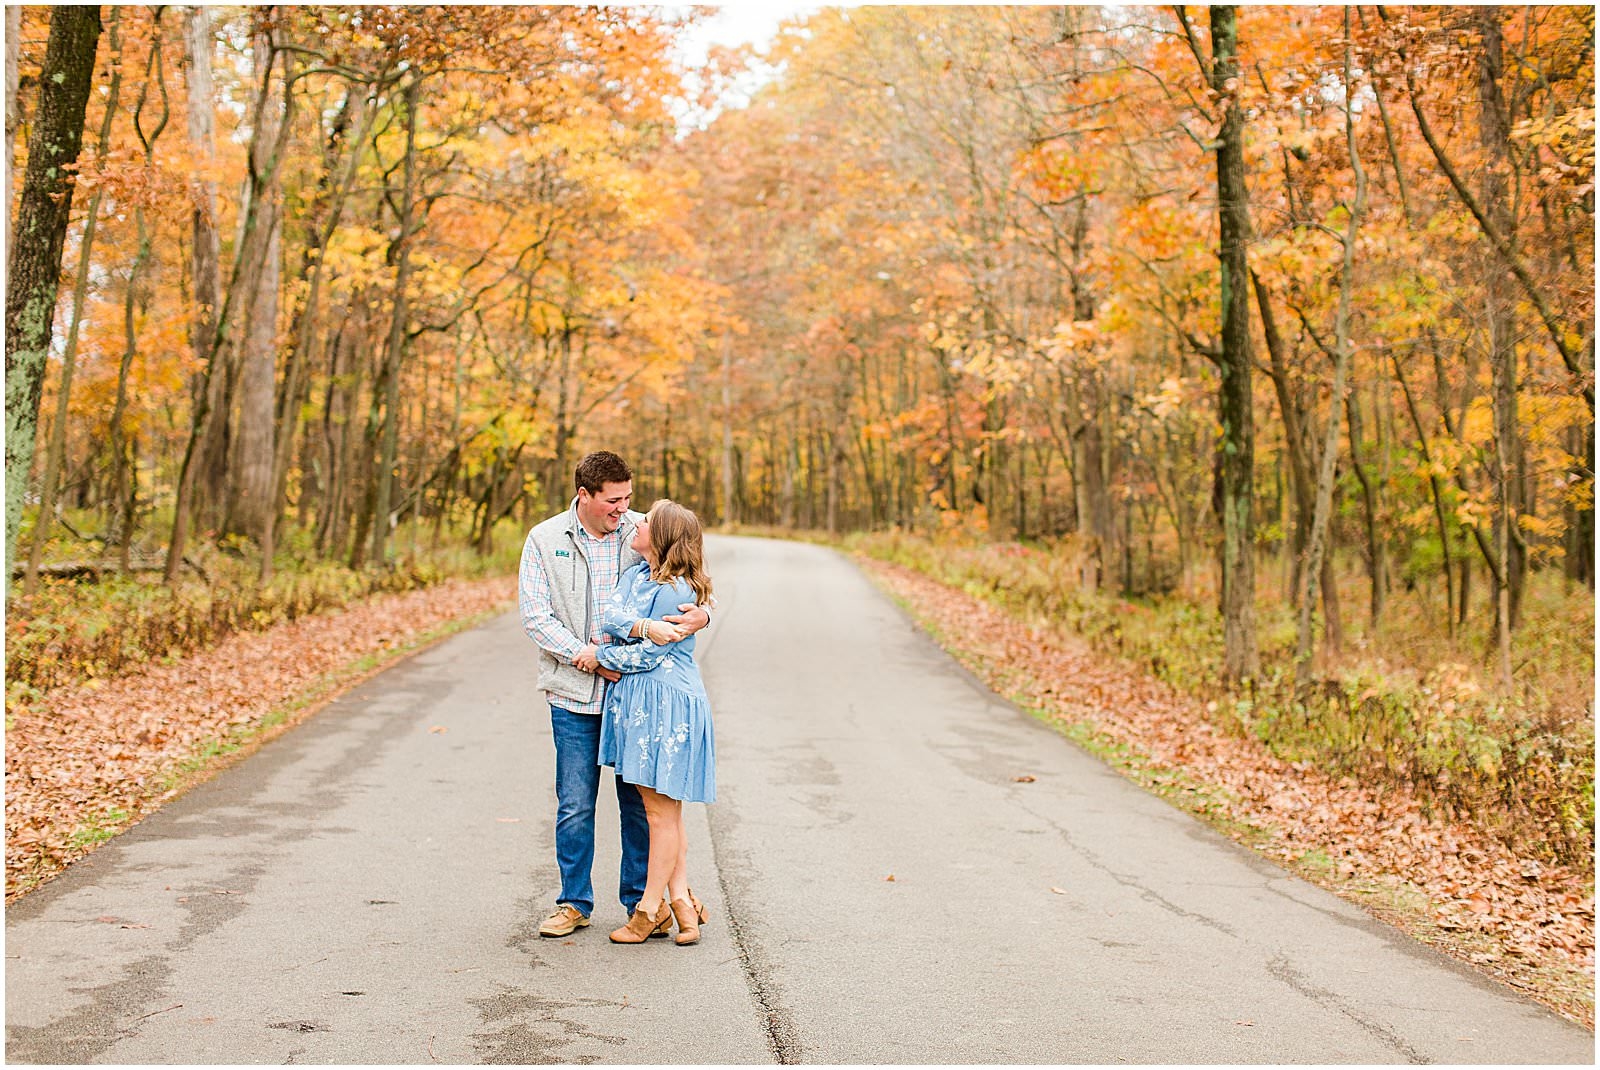 A Southern Illinois Engagement Session | Roxanne and Matthew | Bret and Brandie Photography 0045.jpg